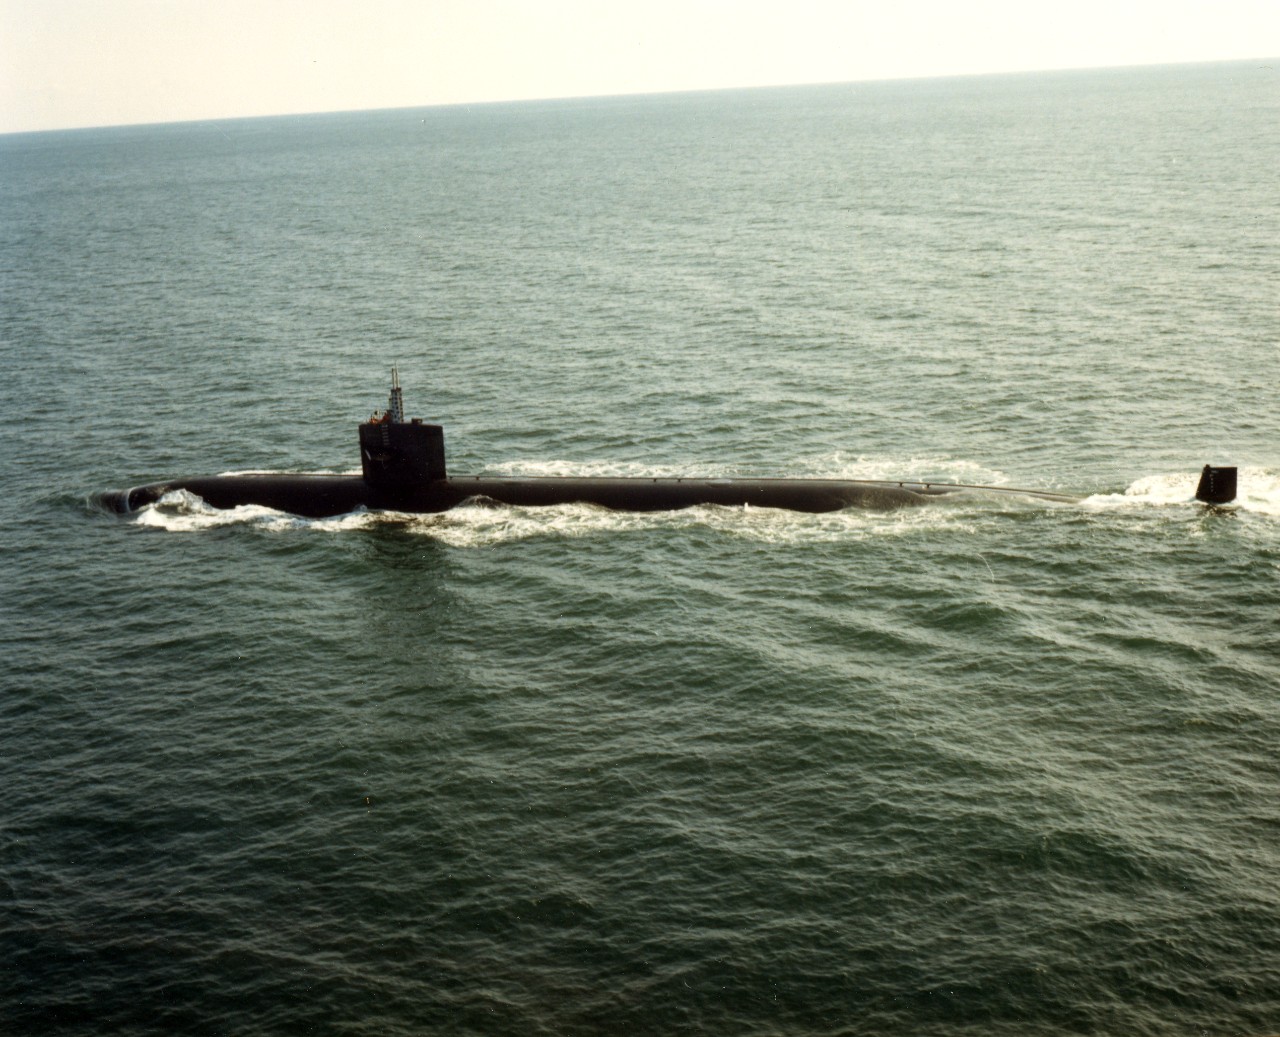 A port view of the nuclear-powered attack submarine USS Houston (SSN-713) underway. January 10, 1983.